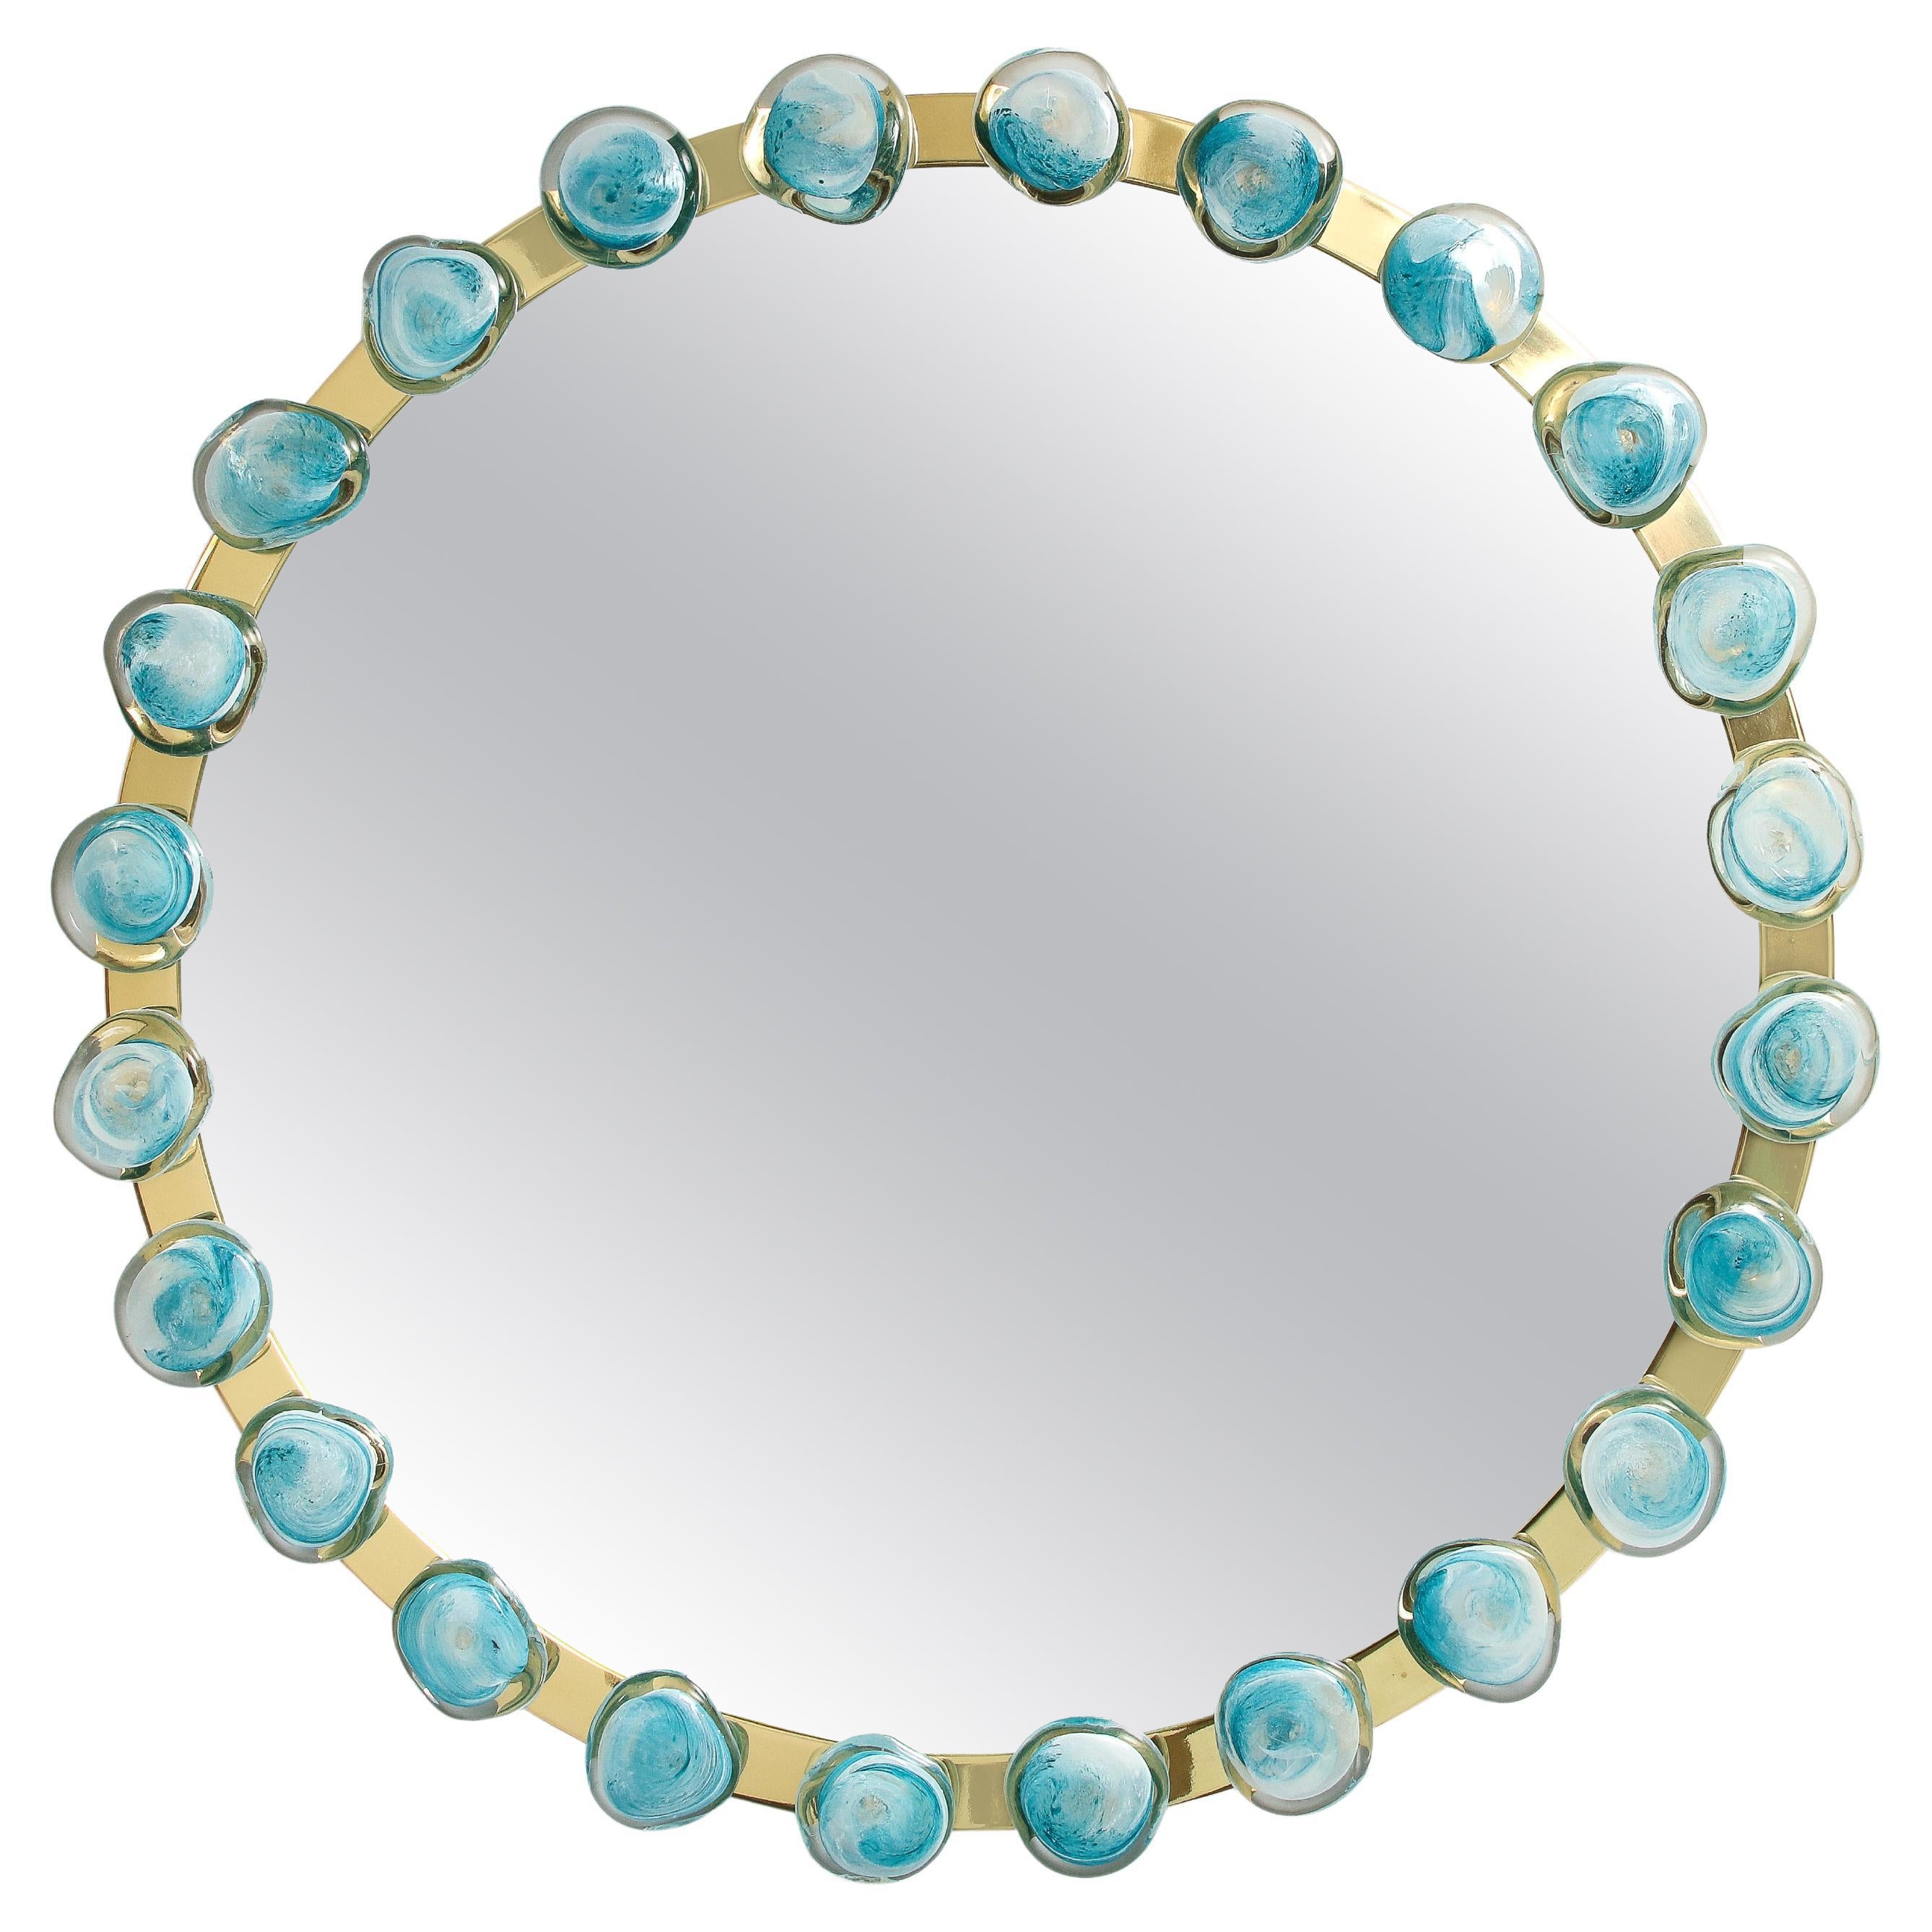 Large Circular Mirror With Blue Murano Ornements For Sale